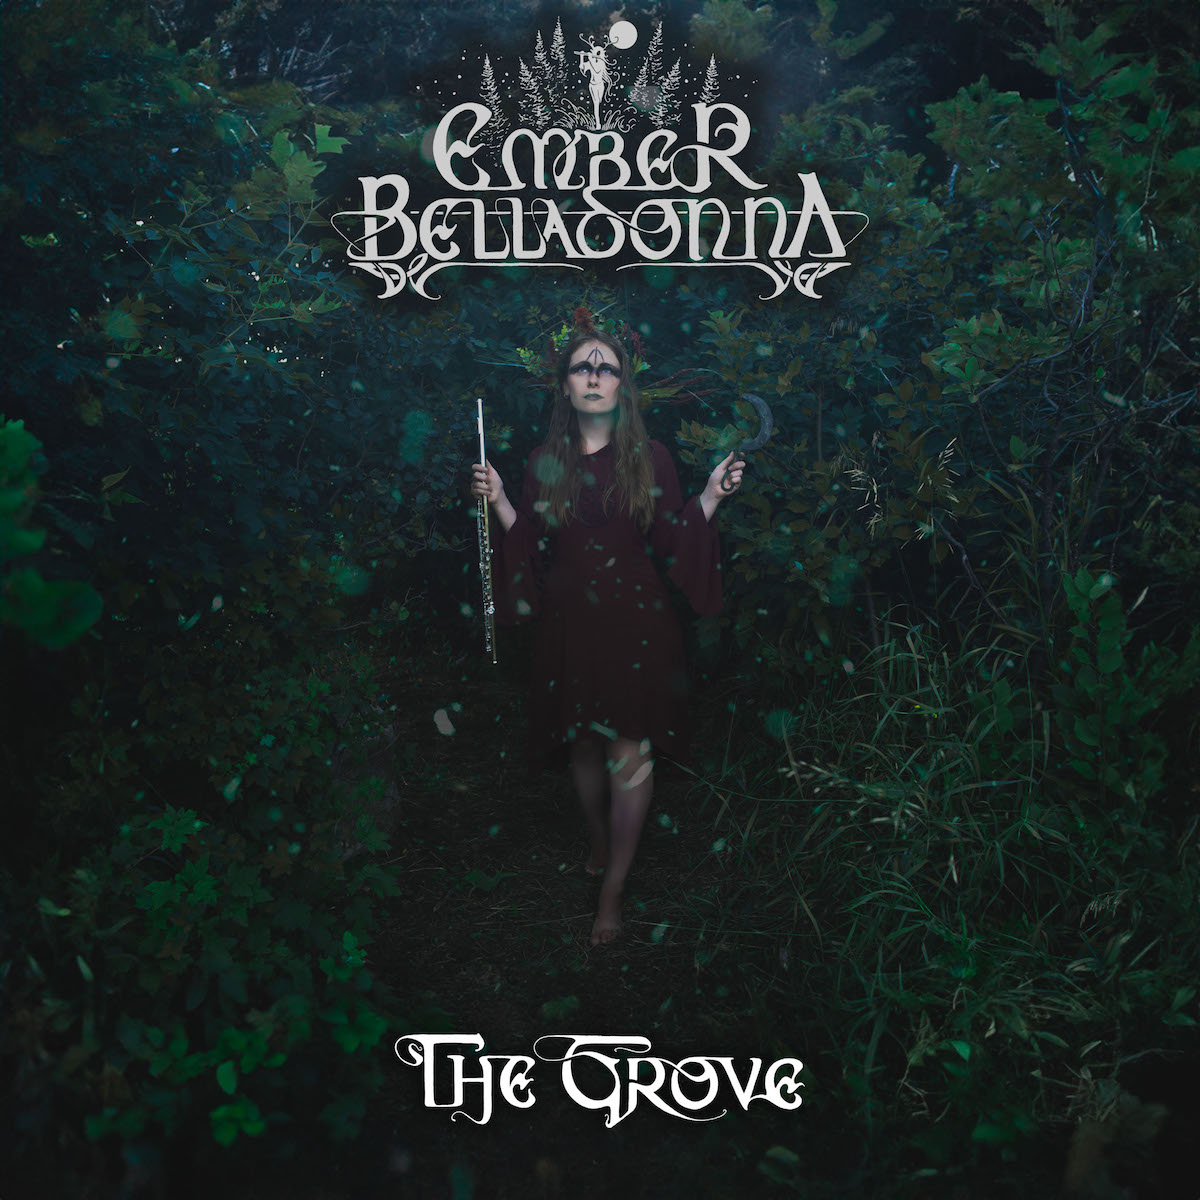 DEBUT ALBUM REVIEW: The Grove by Ember Belladonna